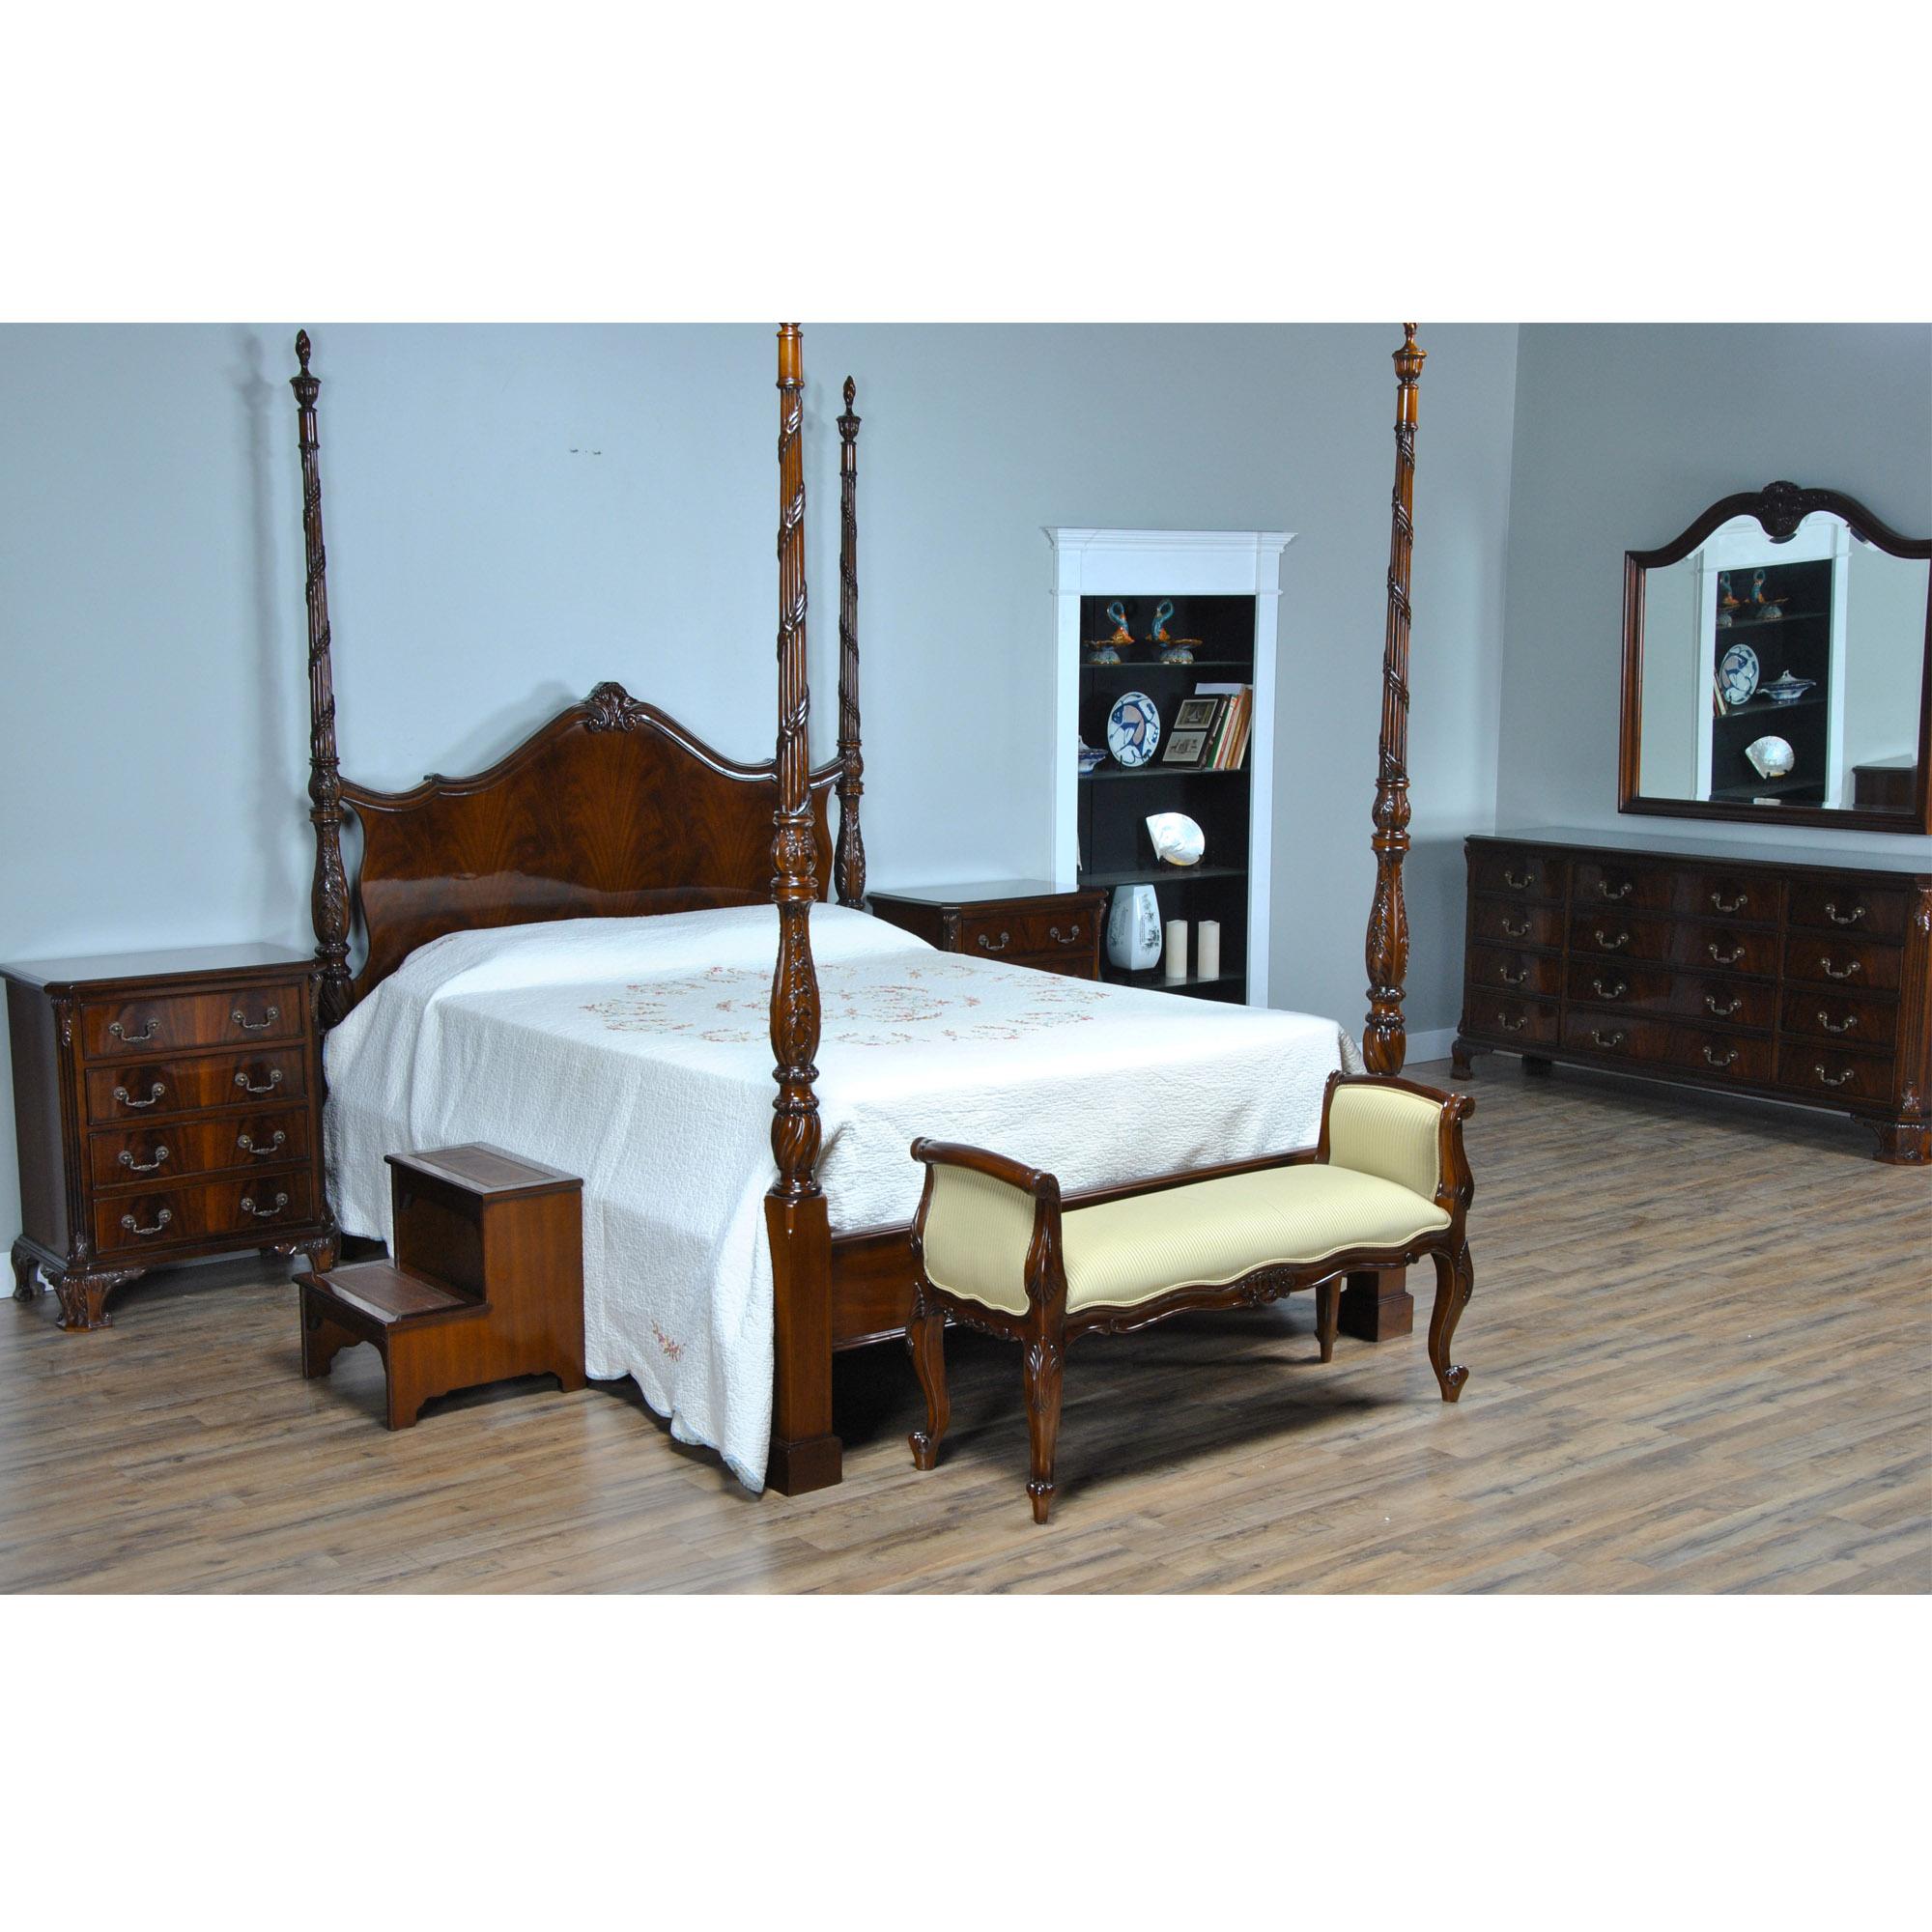 A beautiful King Size Mahogany Four Poster Bed. A high quality King Size Bed with Hand Carved Flame Finial Posts. Each post unfastens with metal fasteners for ease of transport and set up in the home. A Solid Mahogany Frame and the finest mahogany